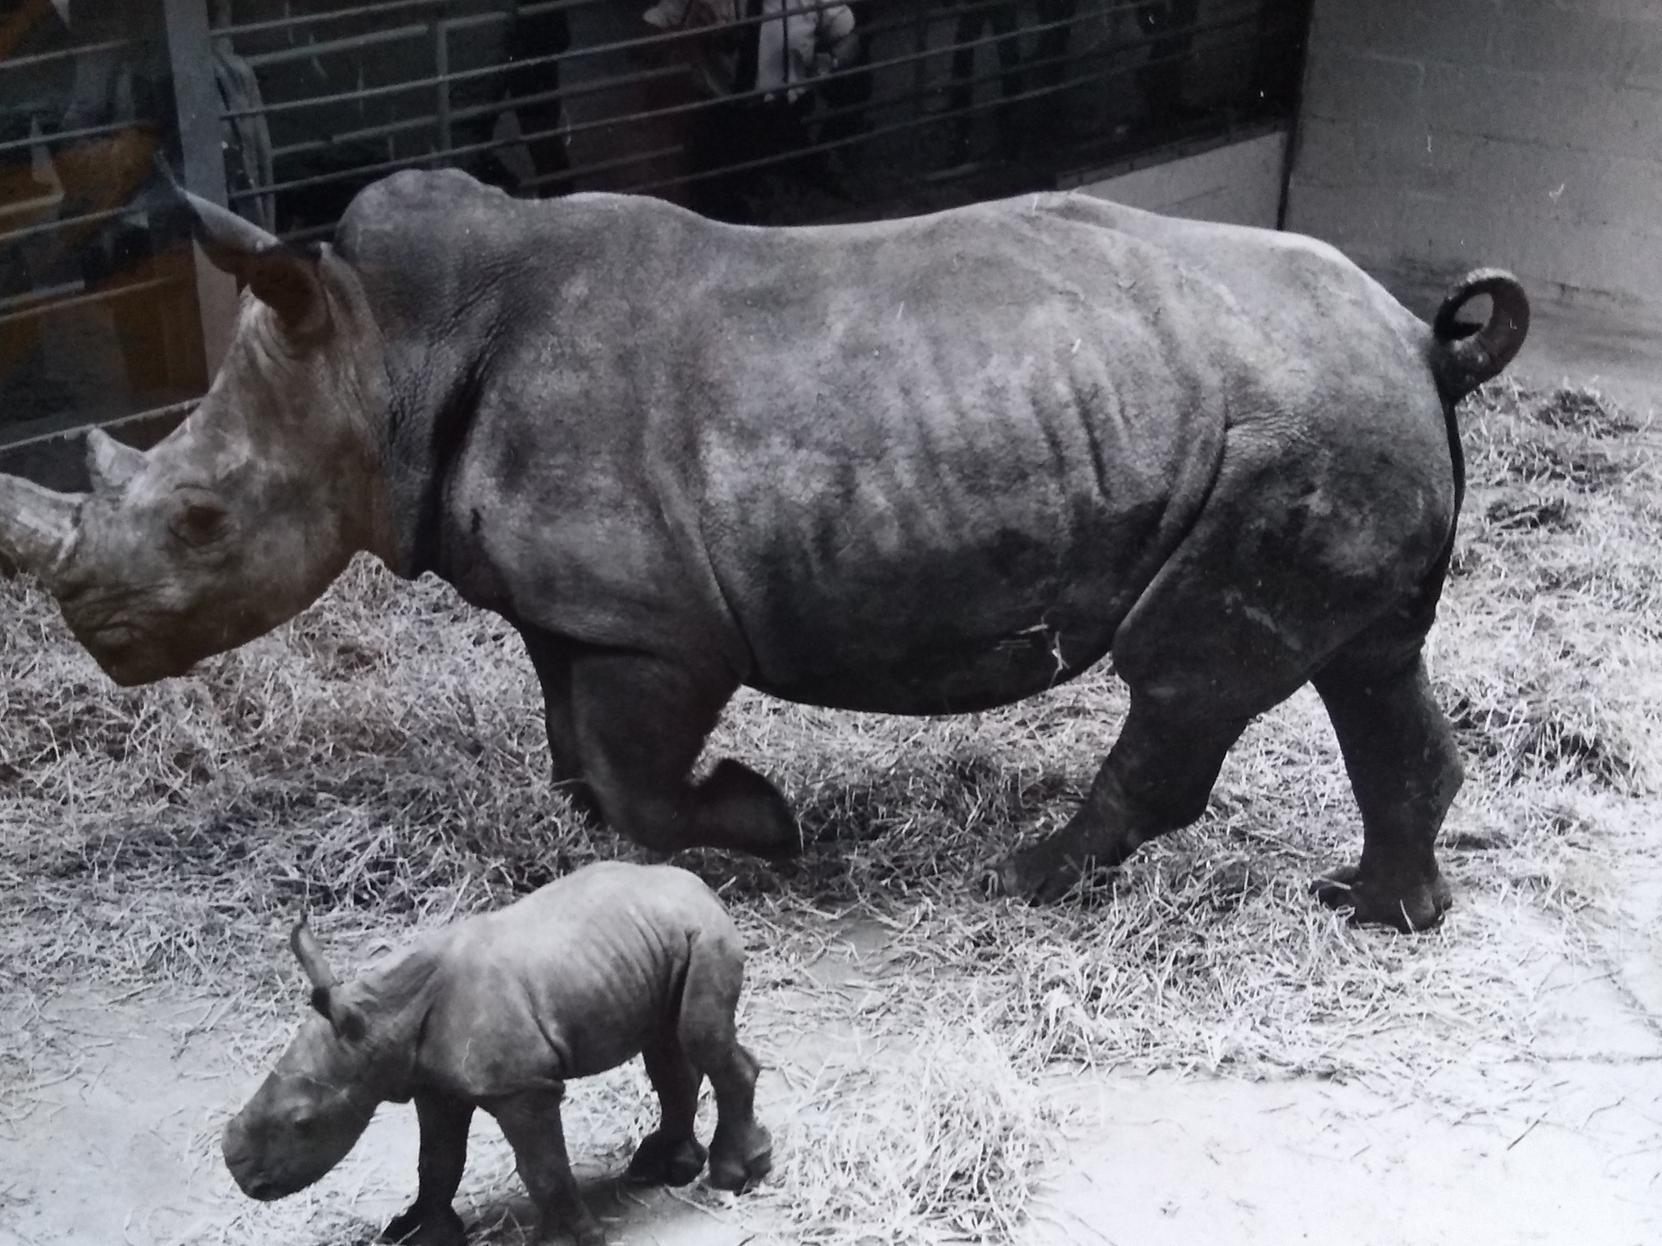 A baby rhino in its enclosure at Blackpool Zoo, watched by its mother